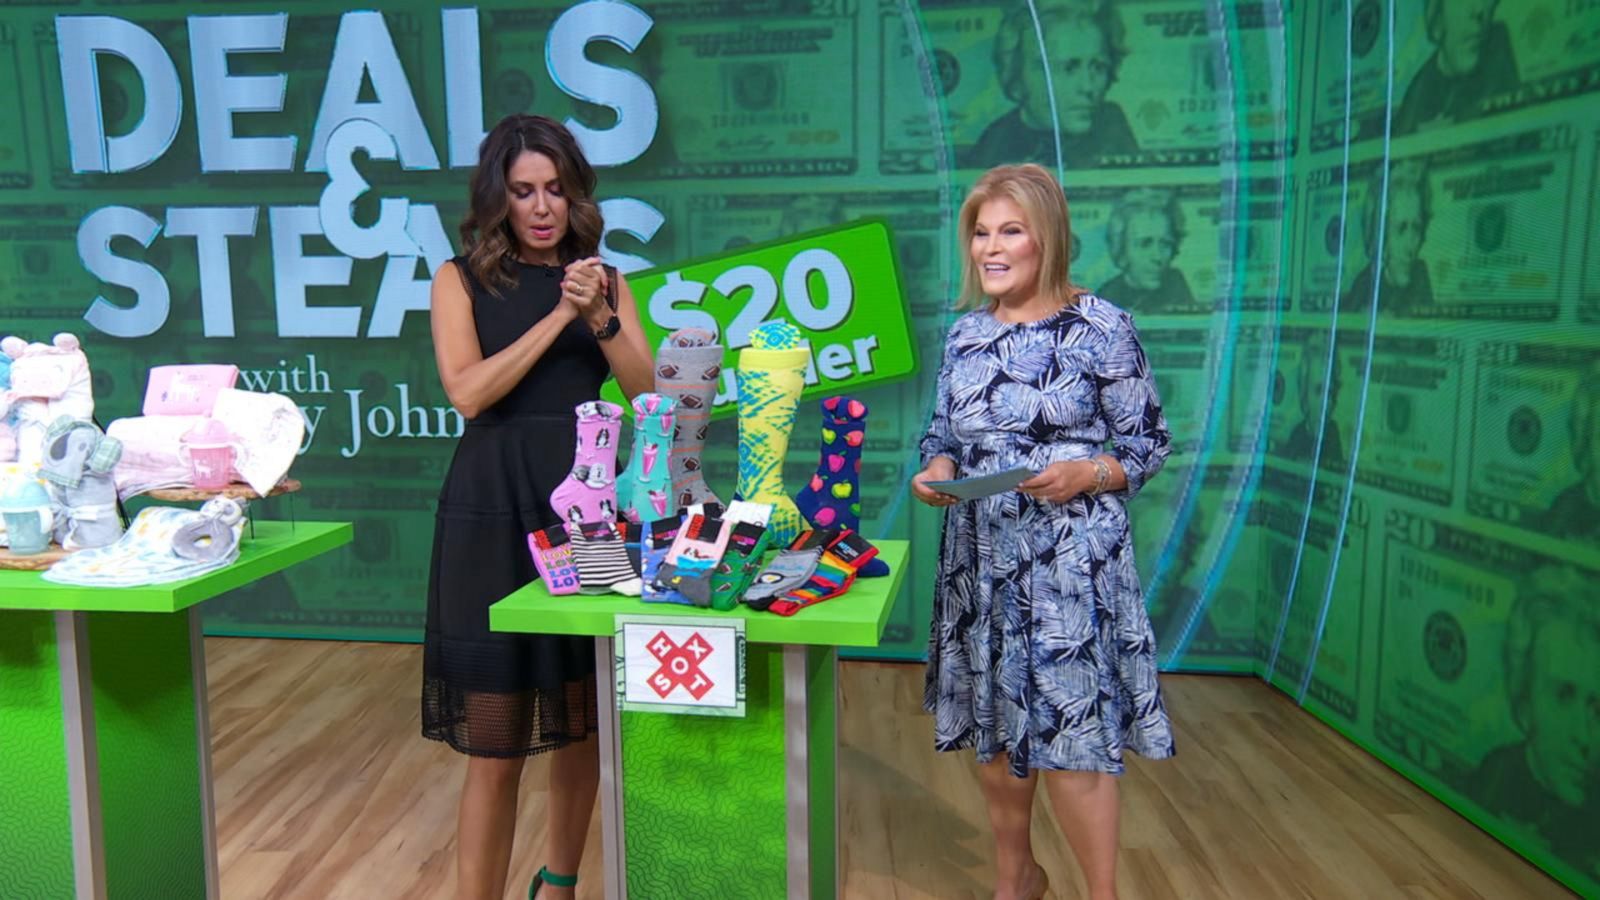 Deals and Steals for 20 or less Good Morning America